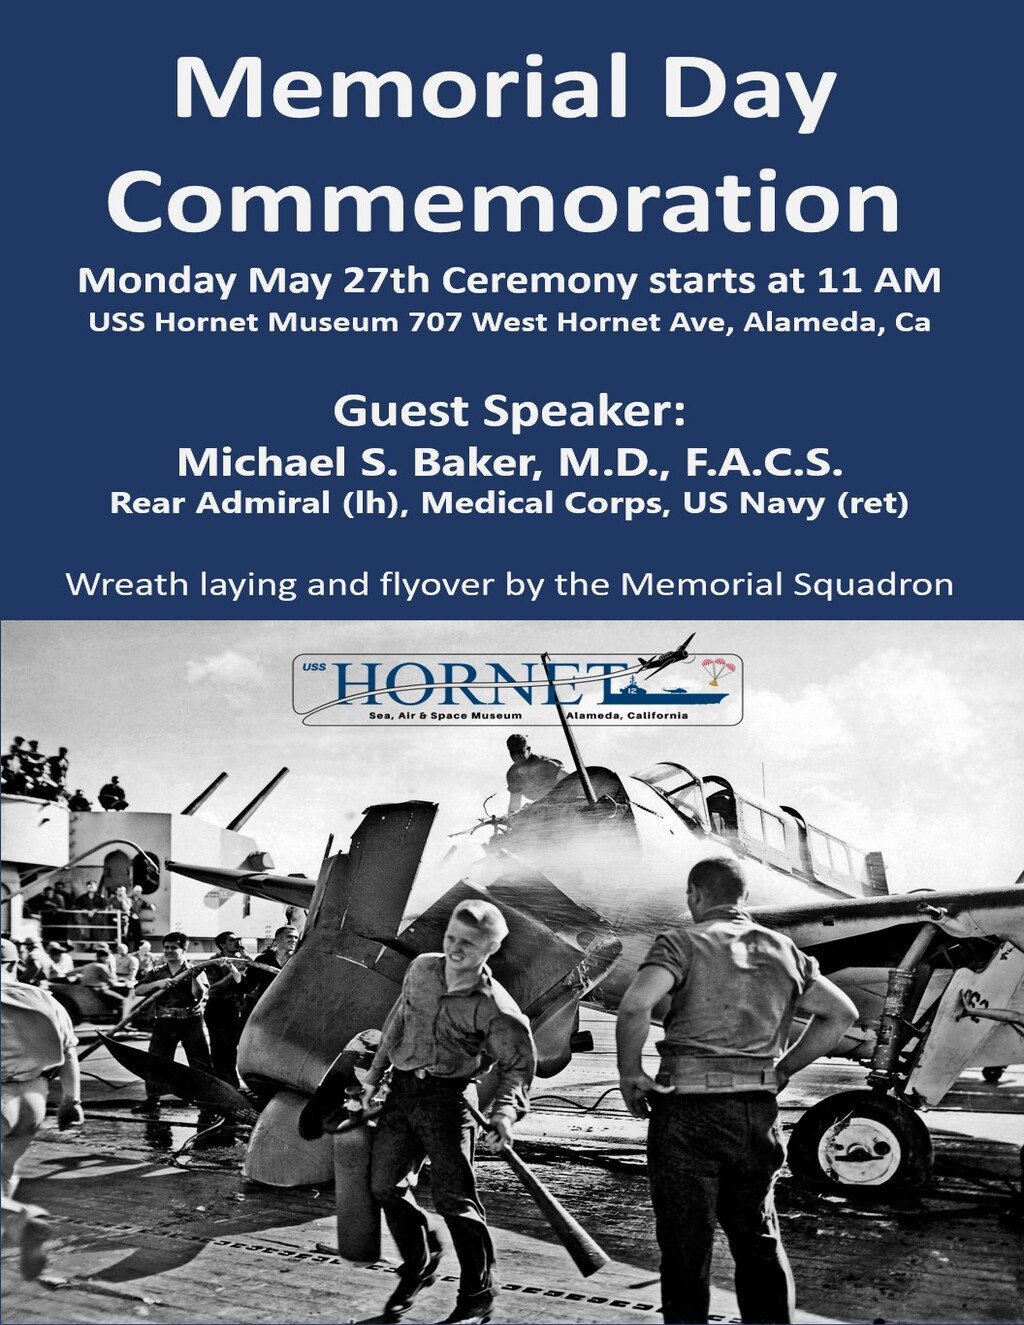 USS Hornet   Sea  Air and Space Museum Remembering Those Who Gave Their Lives  Memorial Day Commemoration at USS Hornet Museum promotion flier on Digifli com